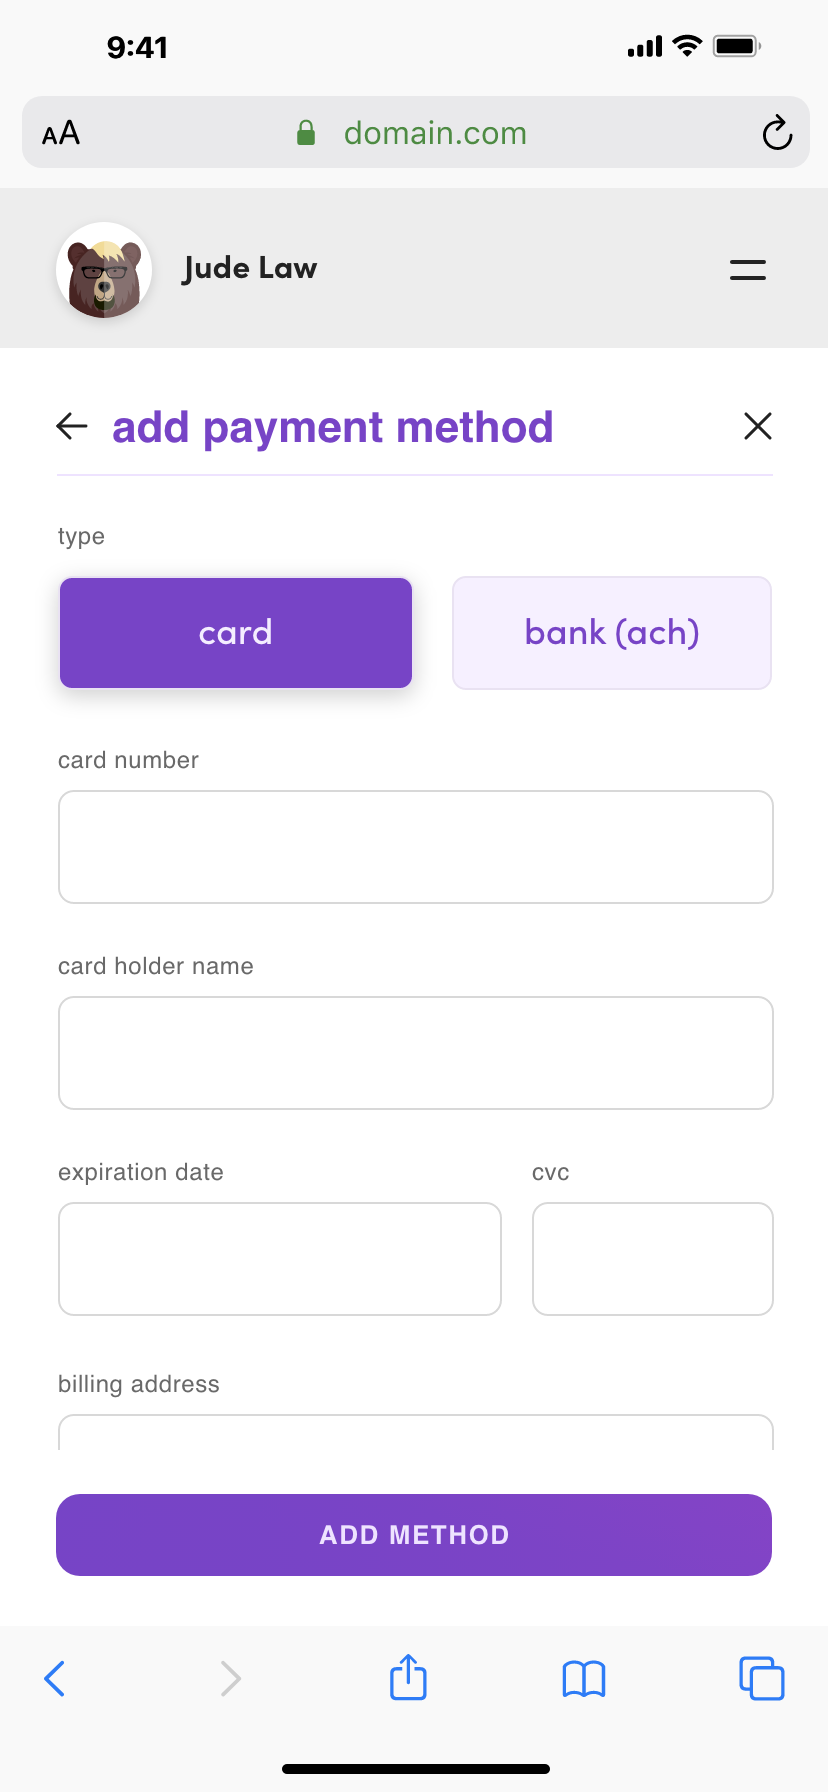 View of form to add a new payment method